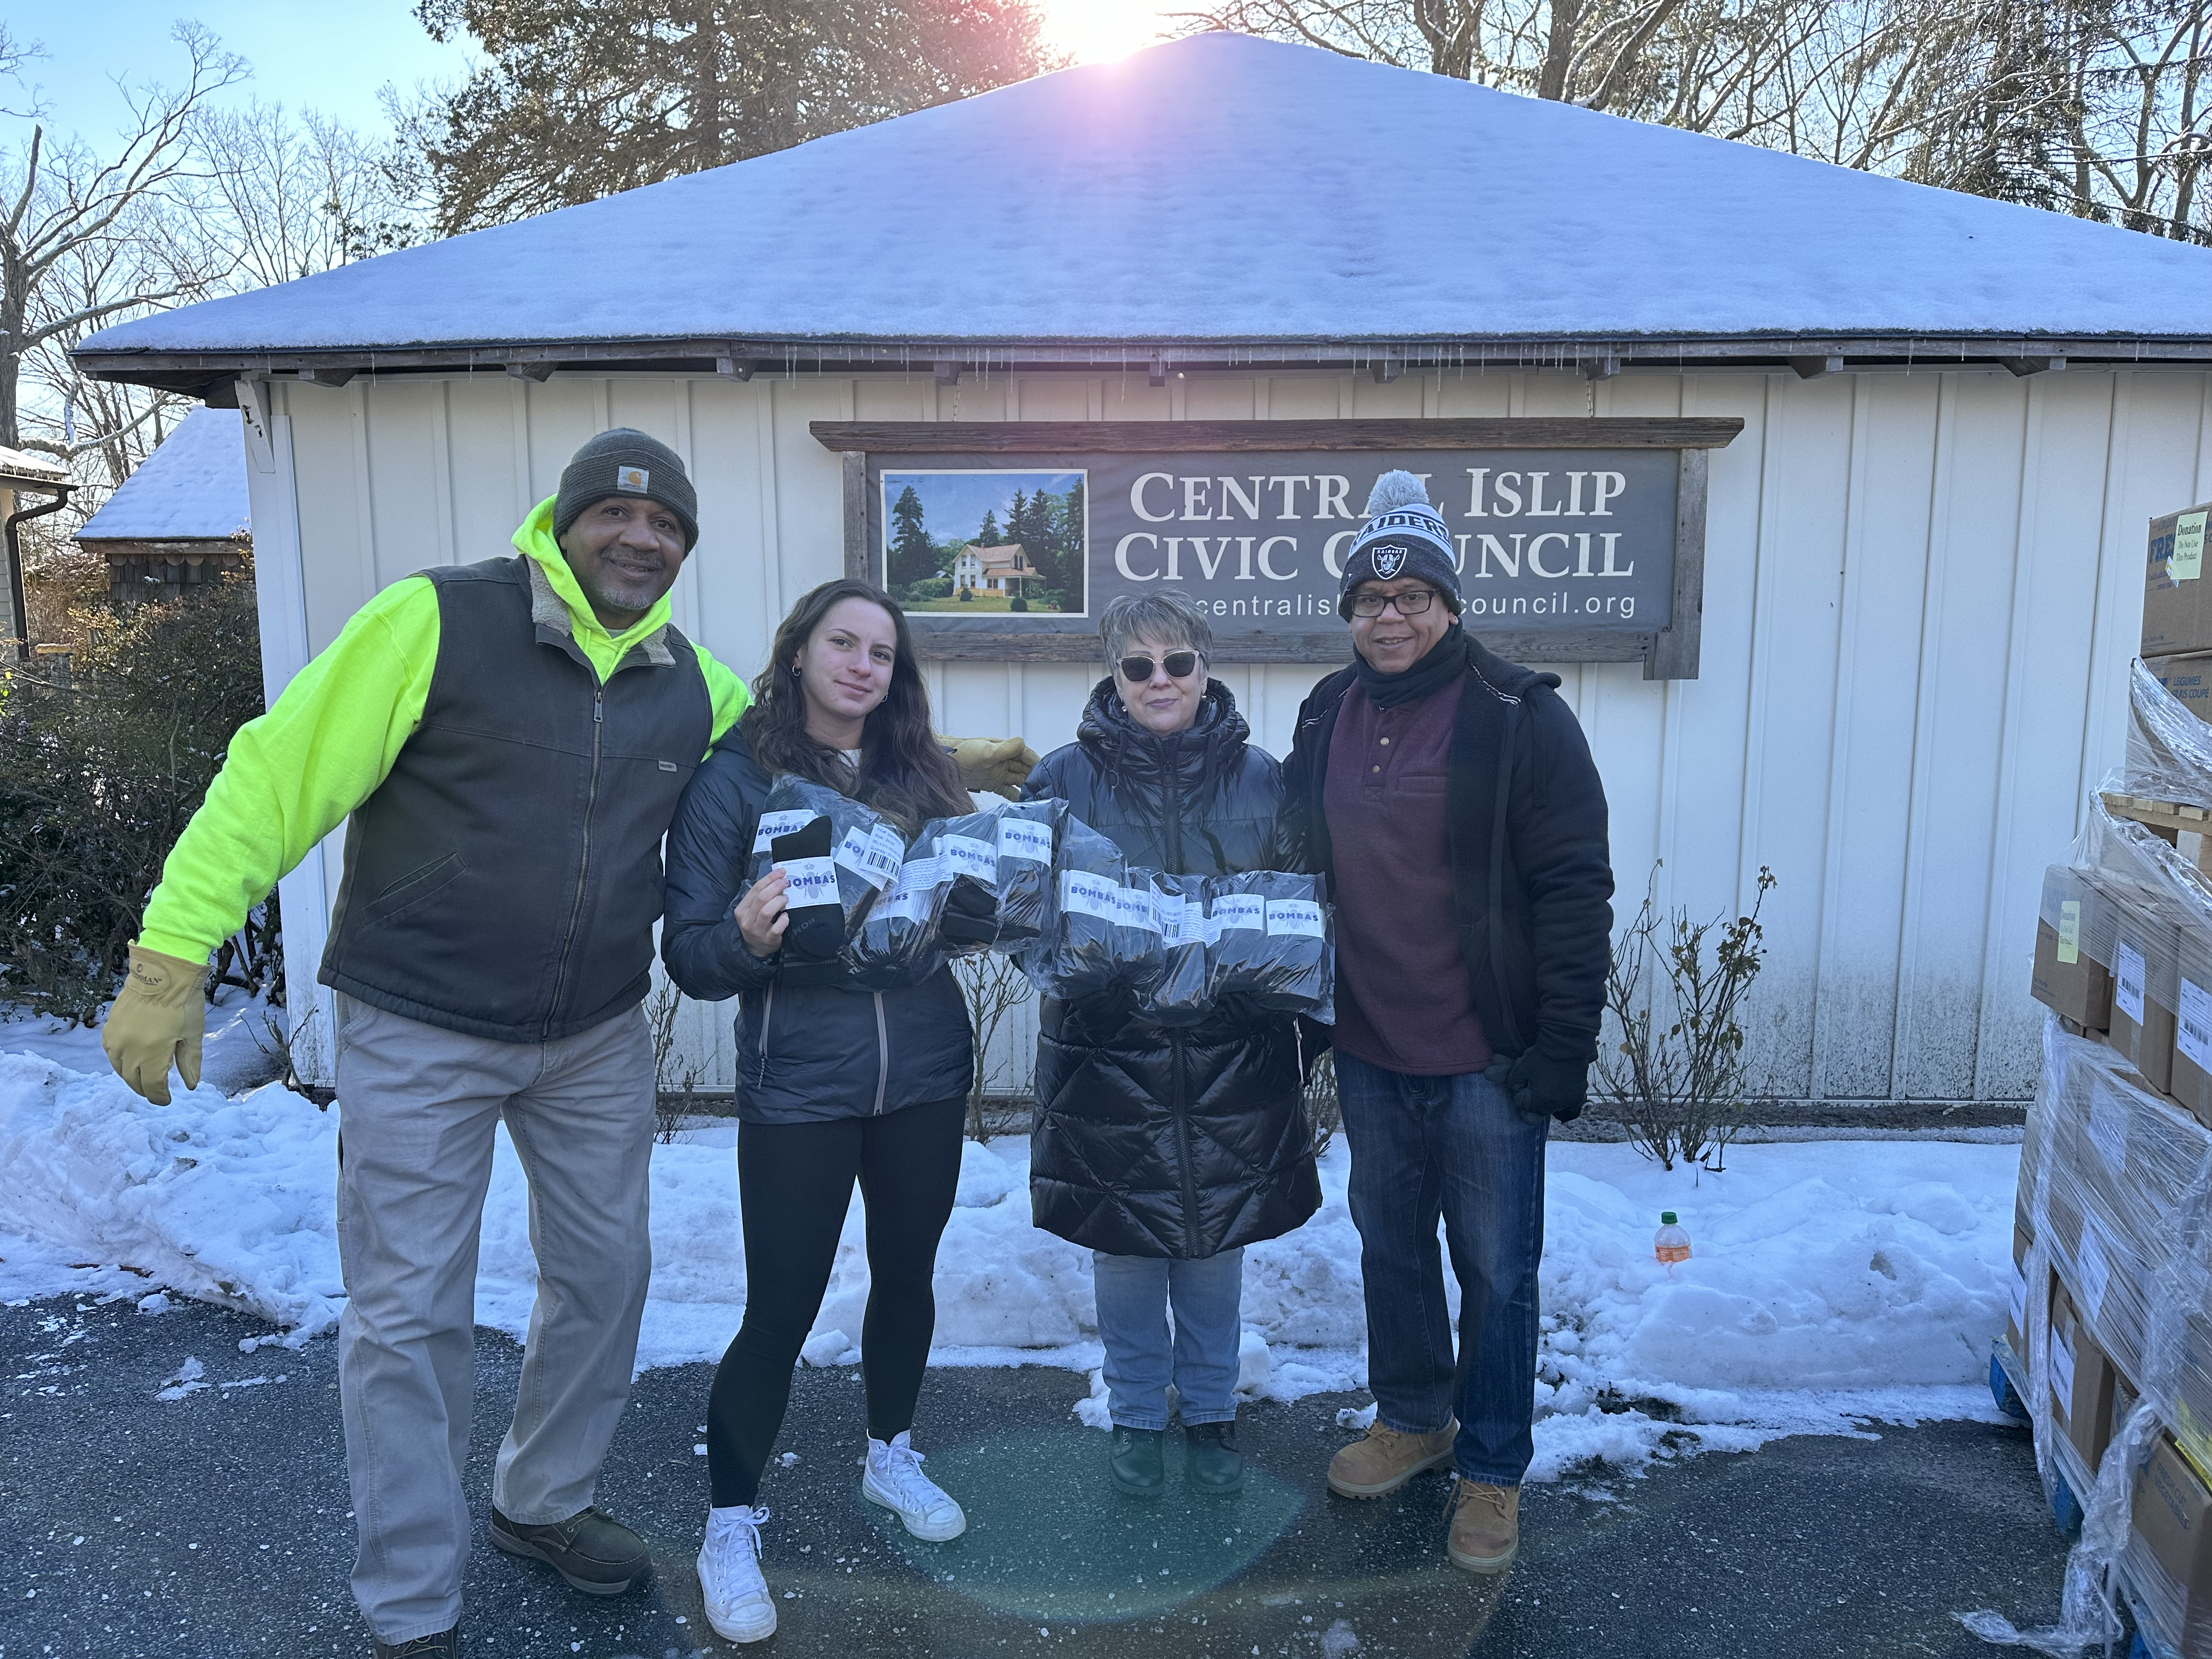 Don8tions Bombas Sock Donaiton to Central Islip Civic Council Food pantry